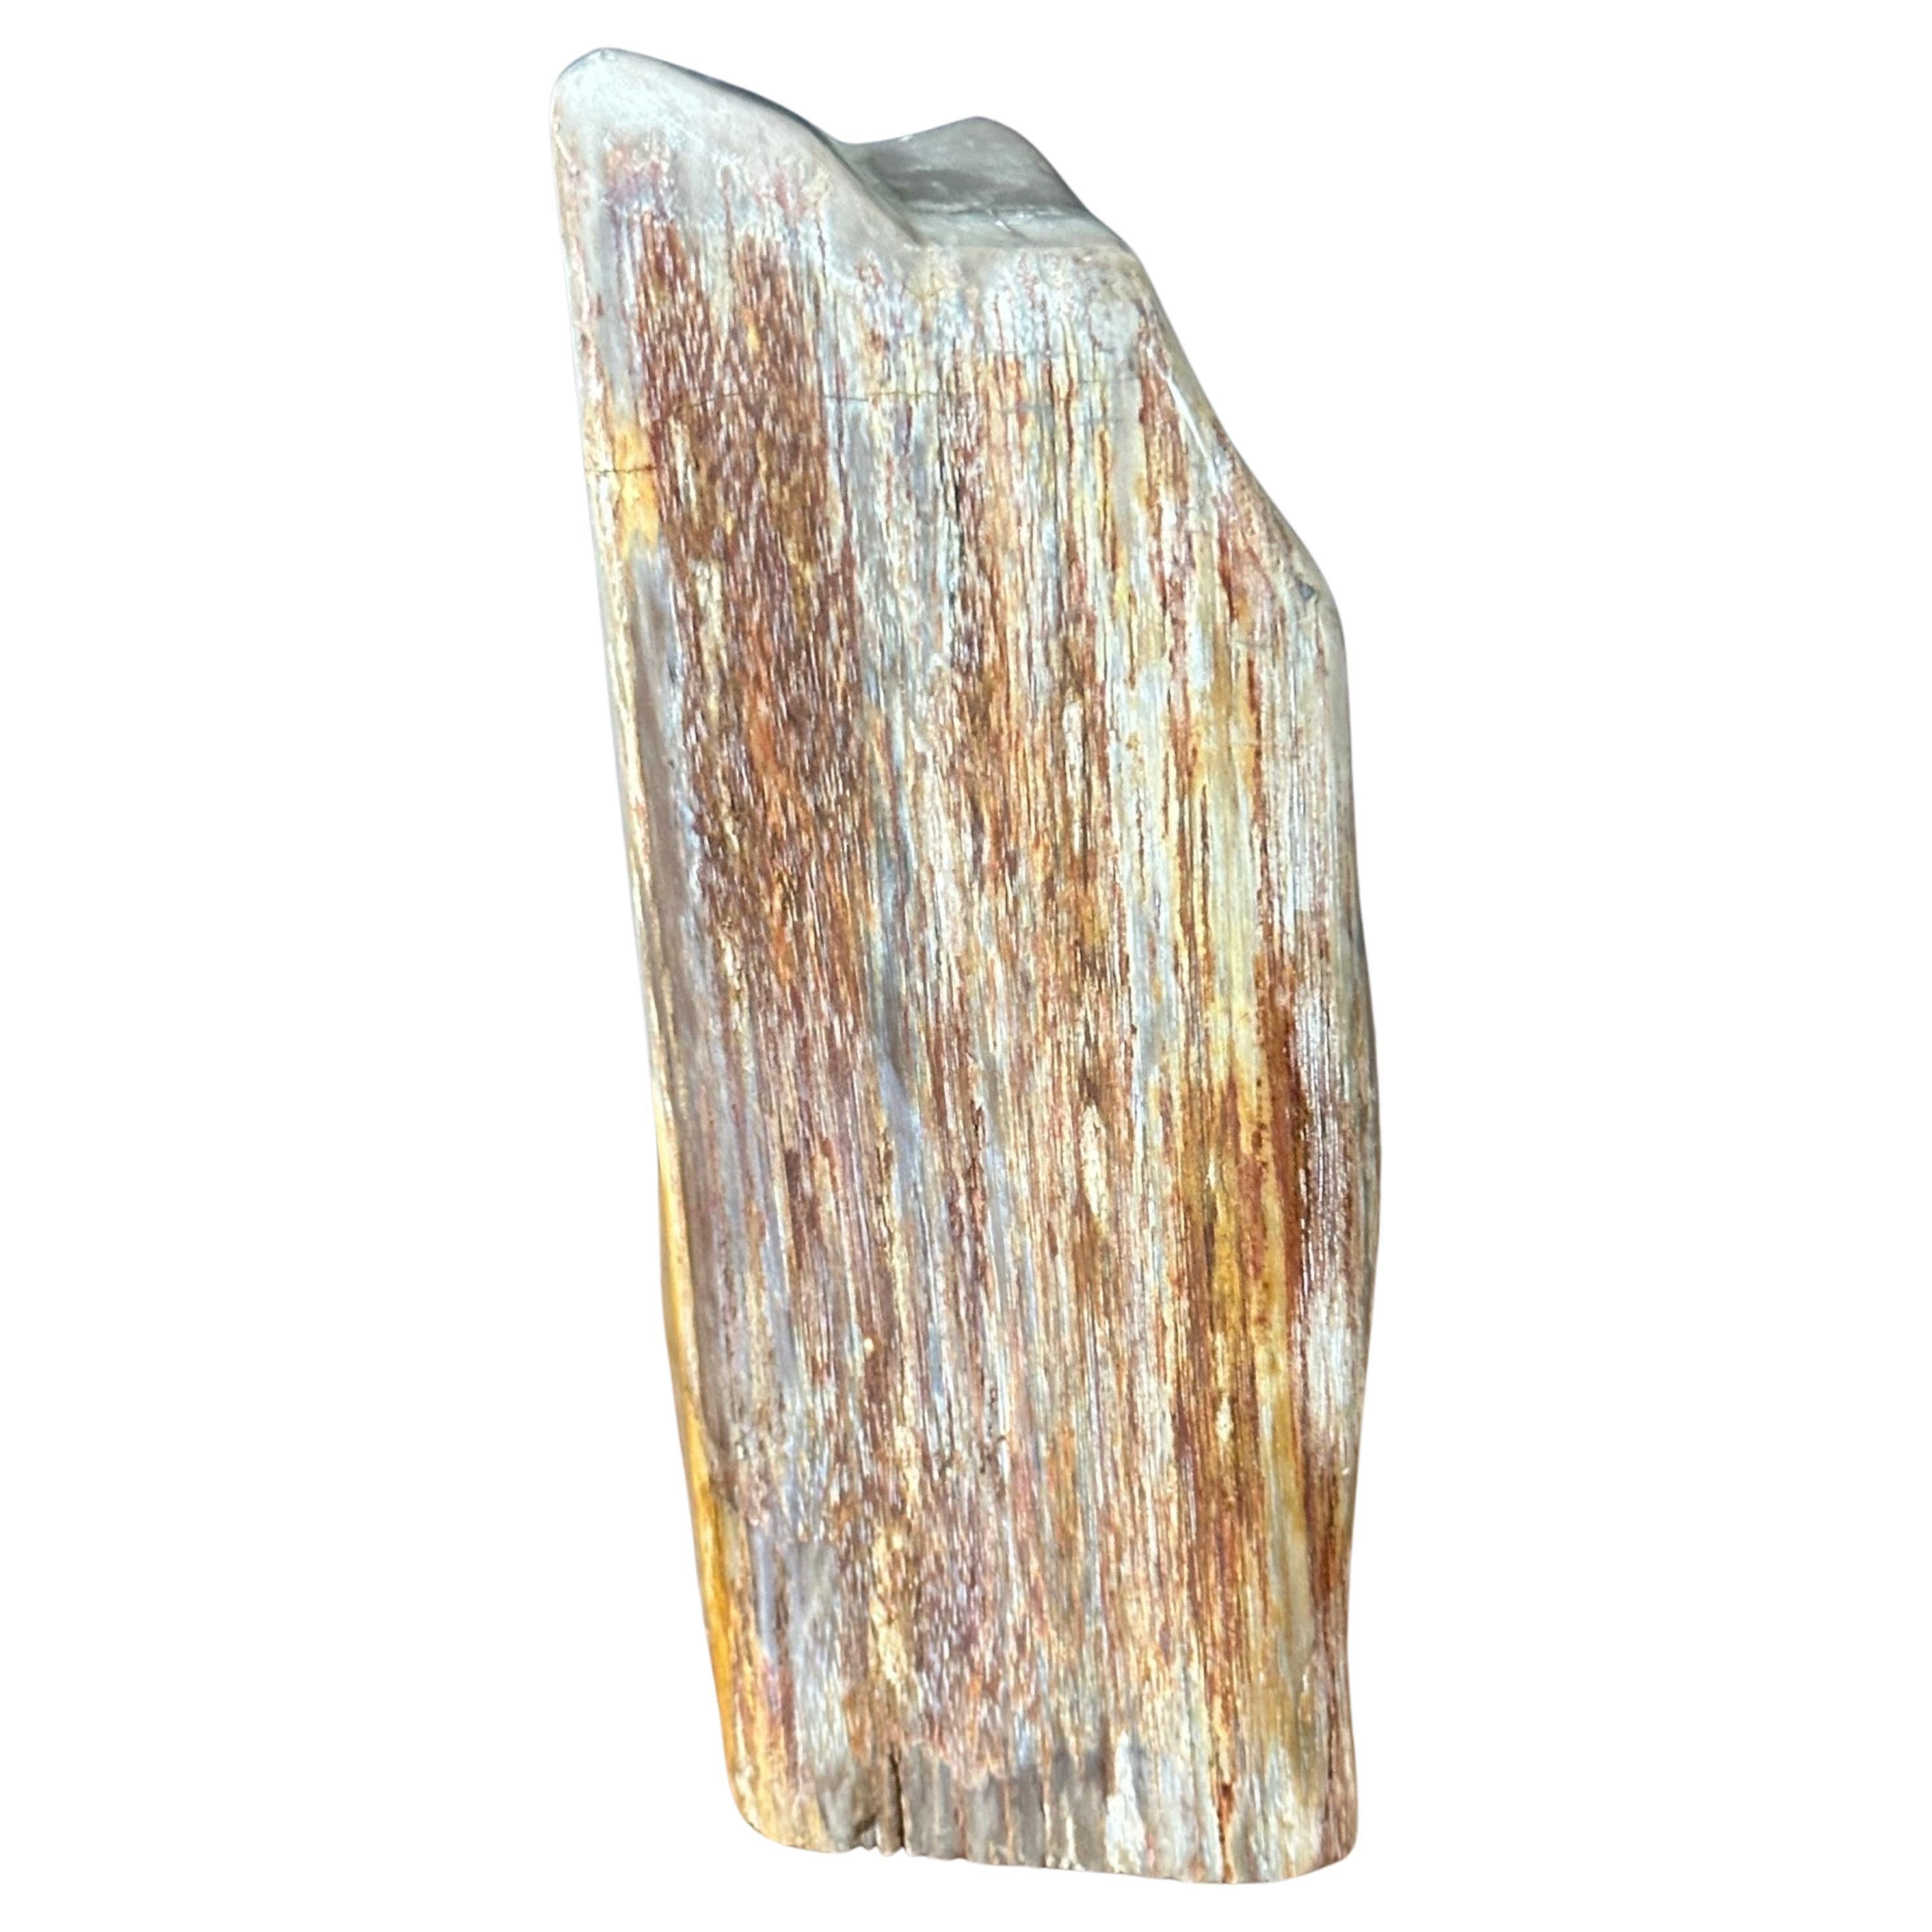 A really nice polished petrified wood sculpture, circa pre-history.  Brightly colored tan, brown and cream tones with naturally formed patterns caused by fossilization over millions of years. Finished with a highly polished surface, the exterior